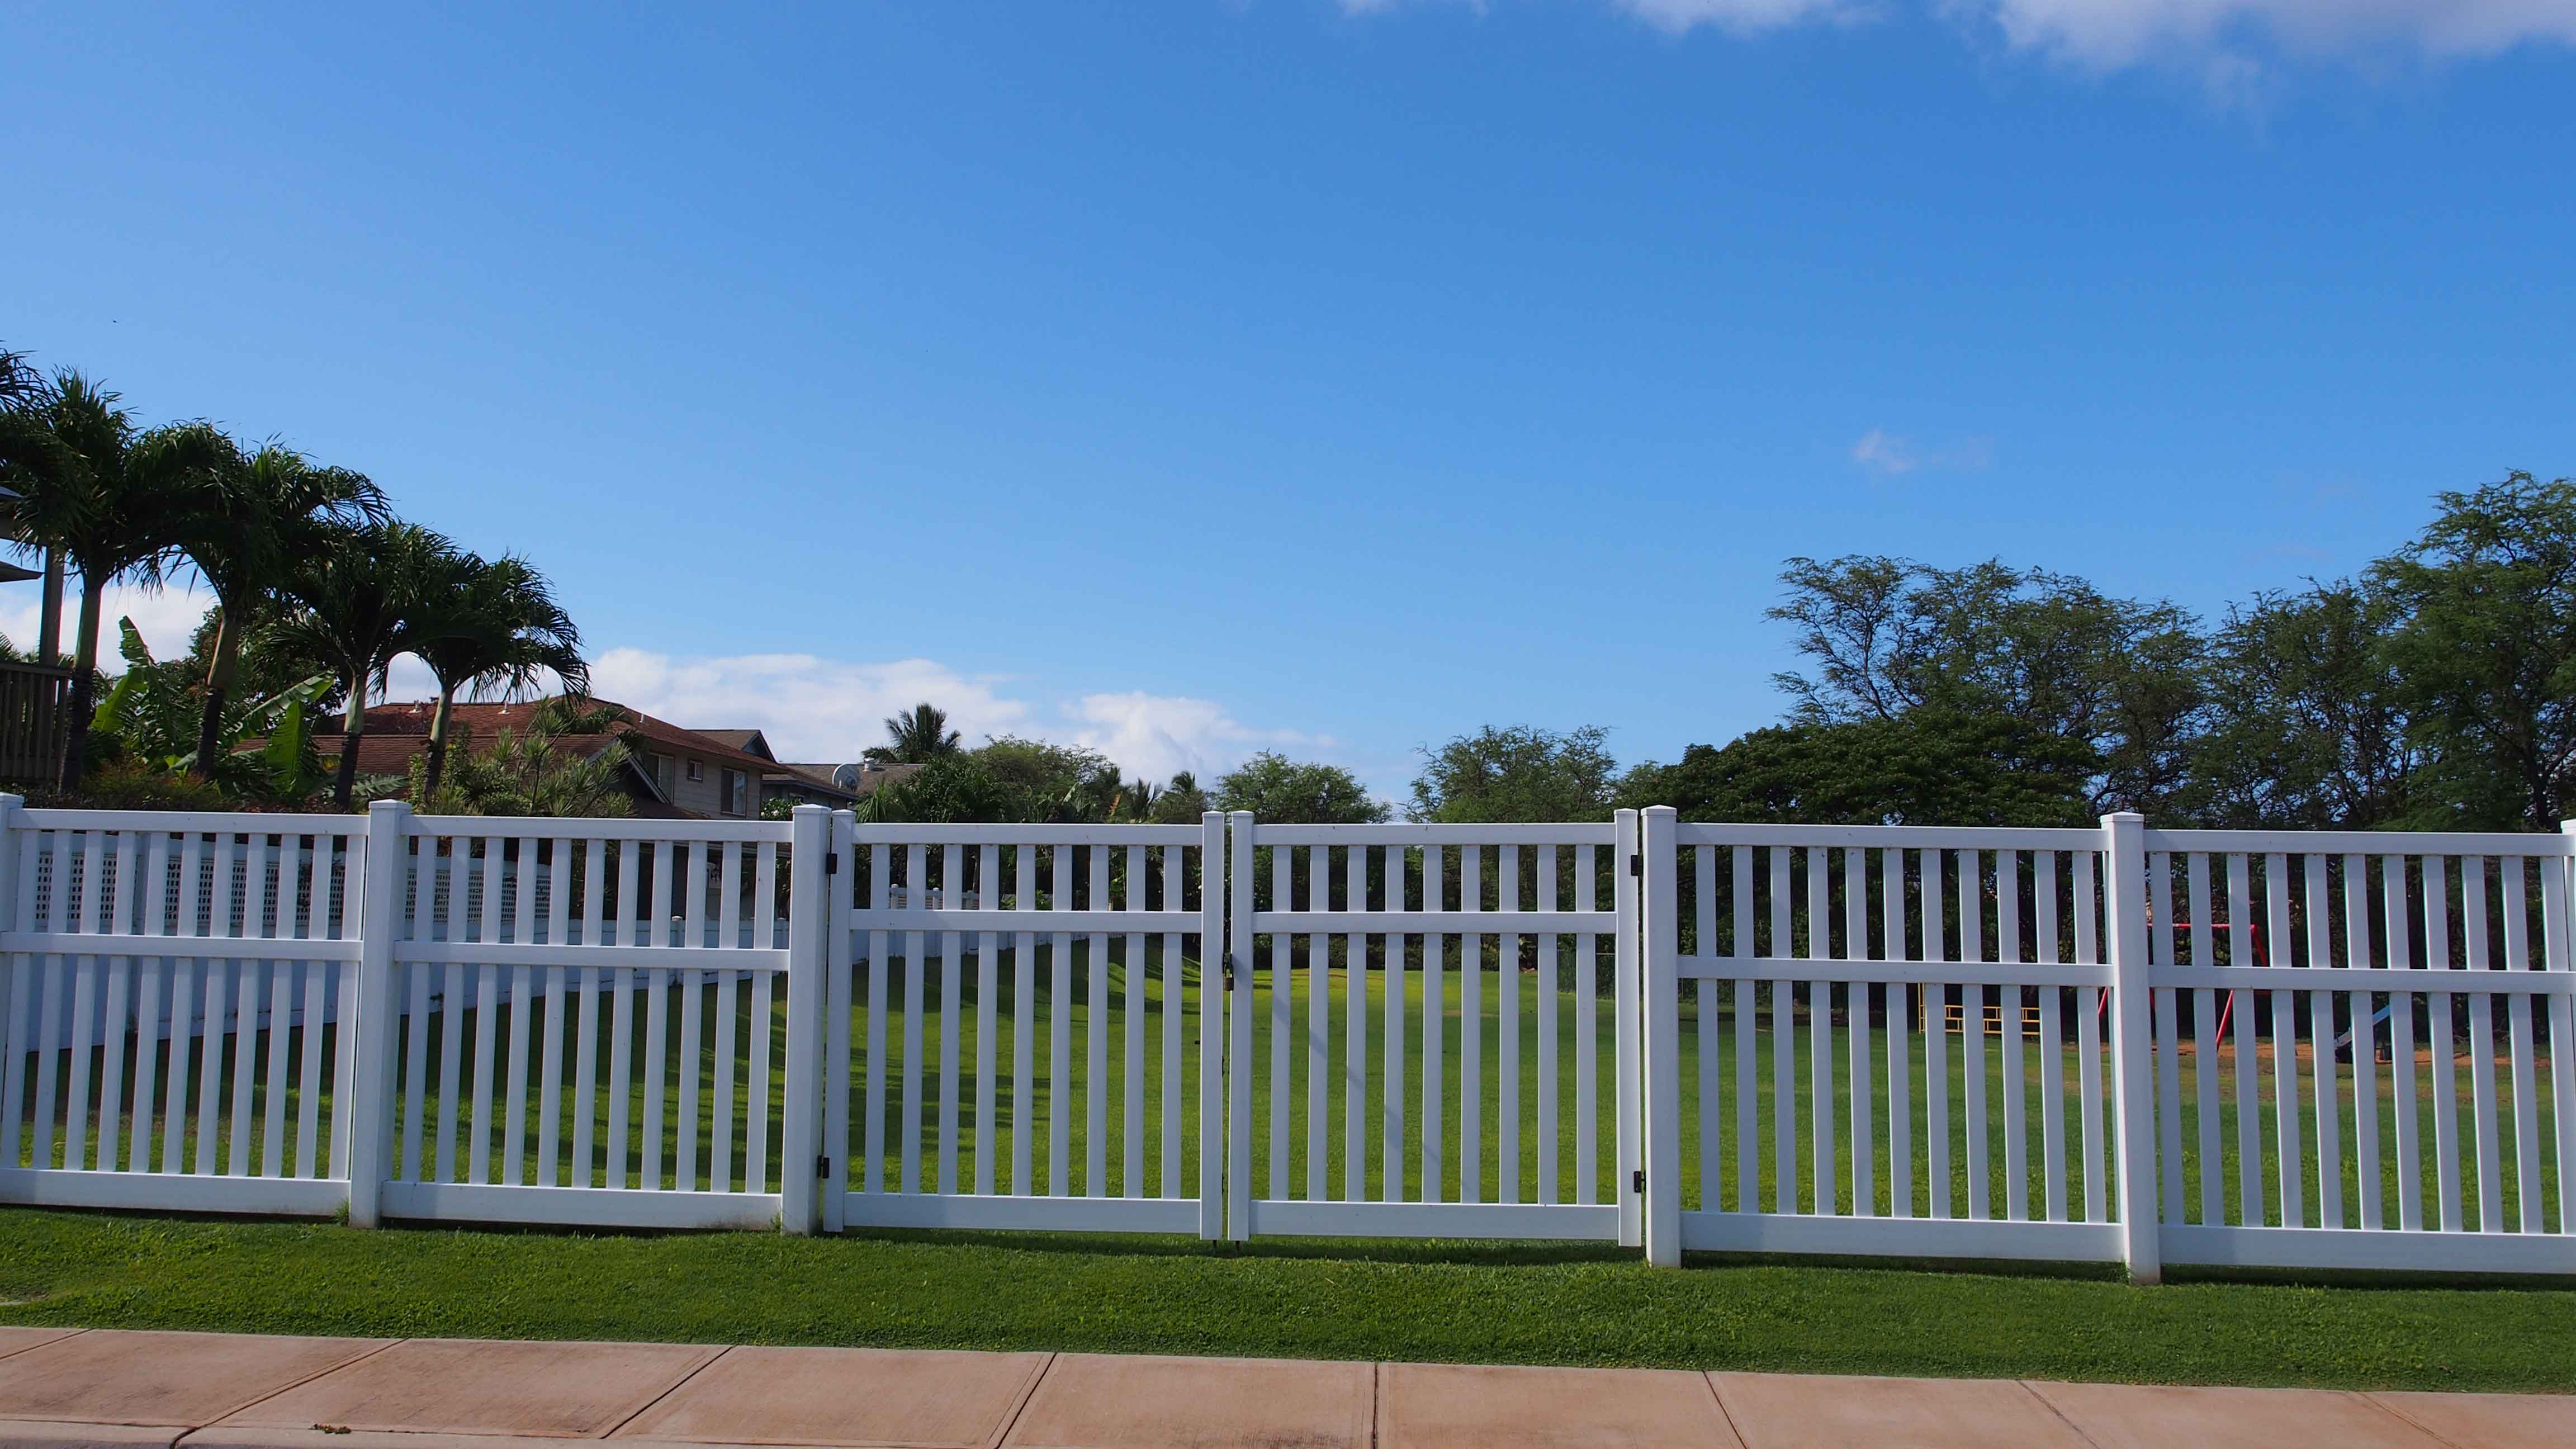 Vinyl Fencing Products: What Works for Your Yard